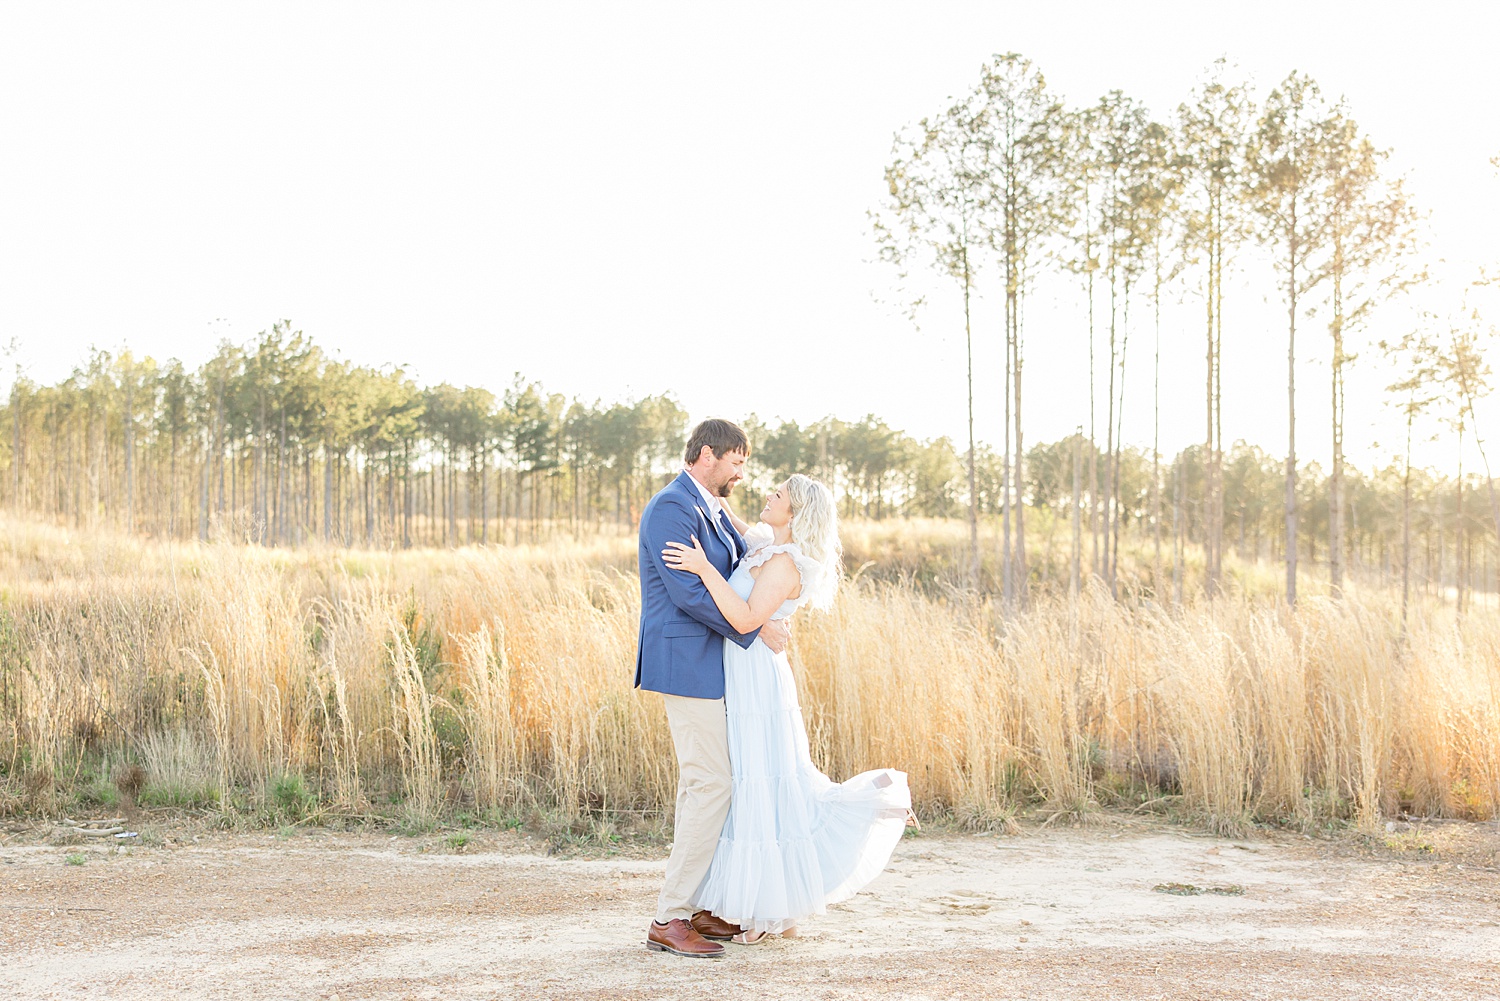 Scenic Birmingham Engagement Session in field of tall grass